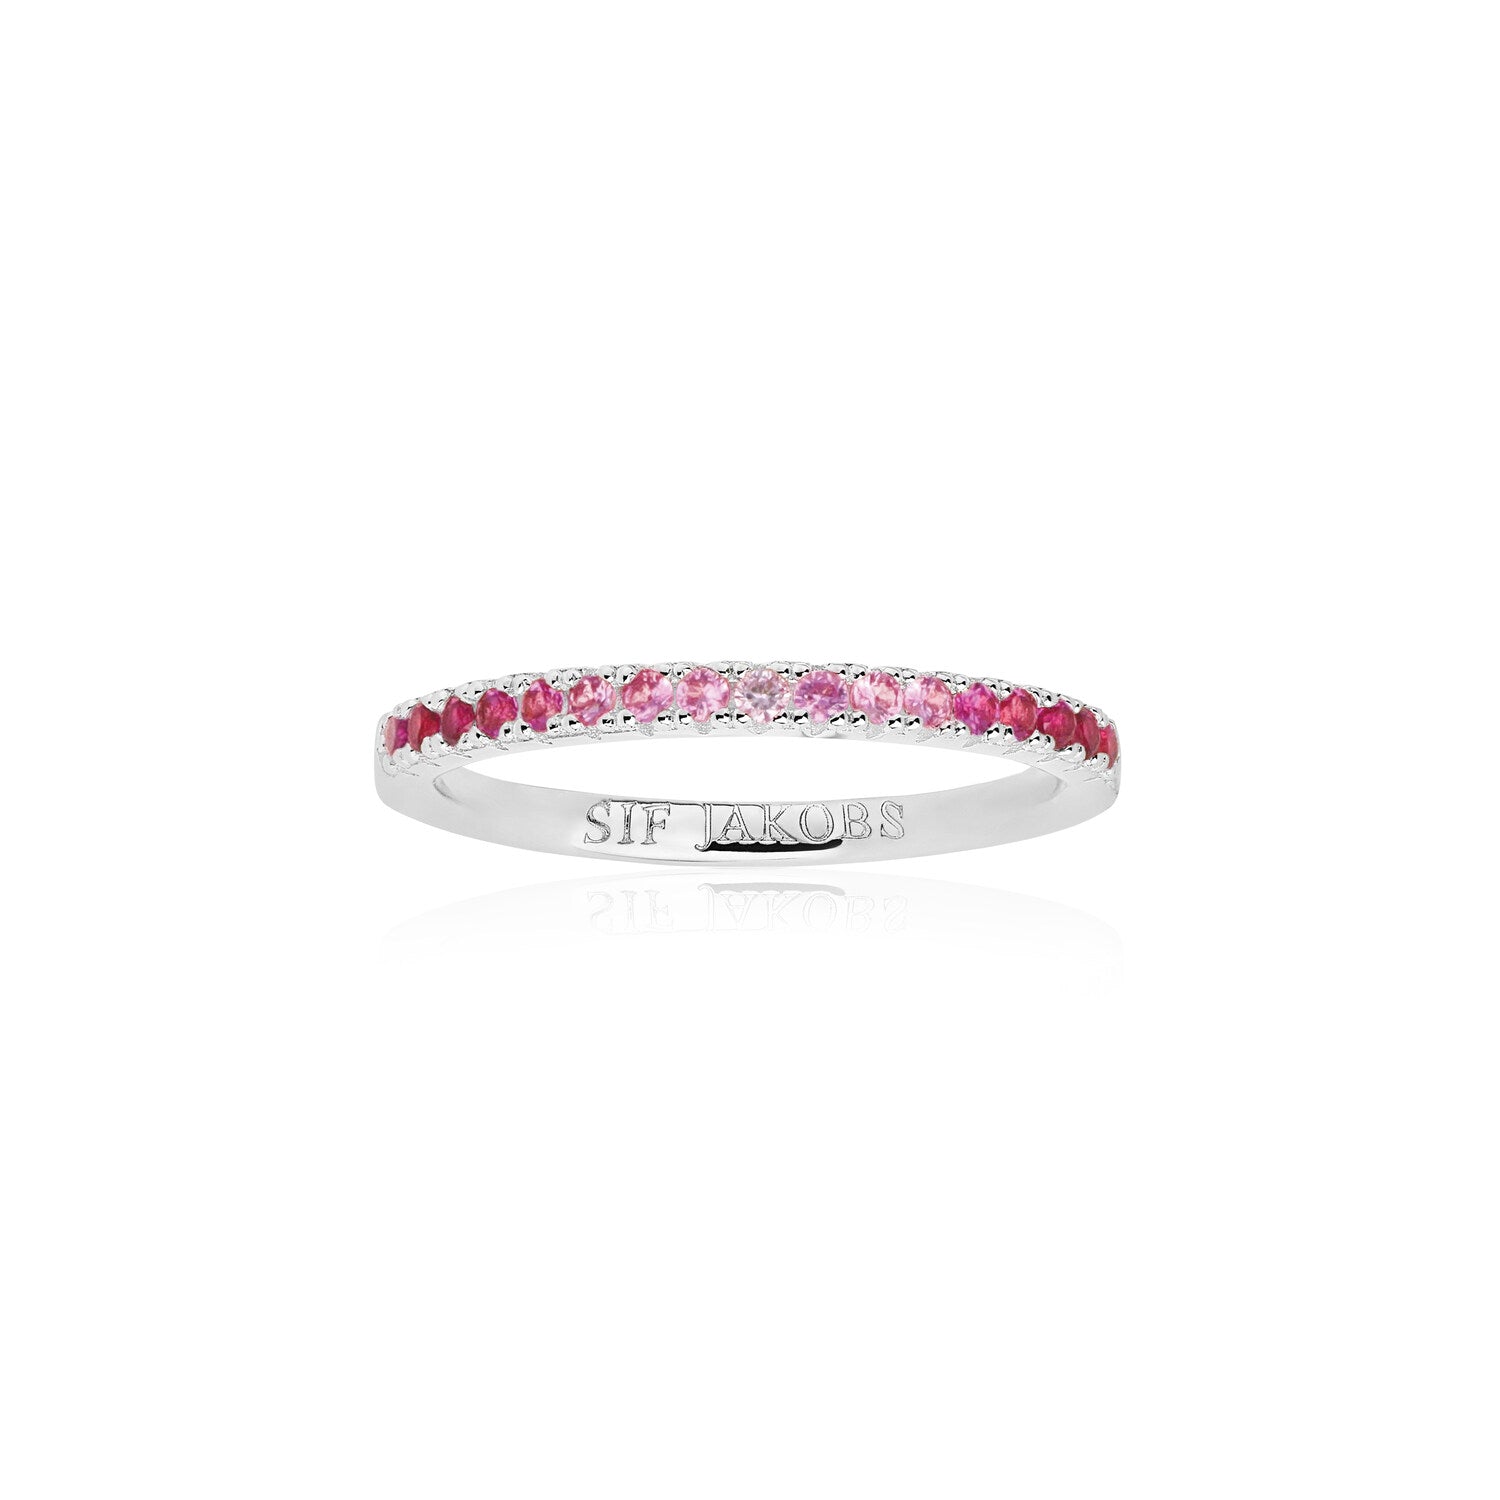 925 Sterling silver | Pink gradient | 60, 925 Sterling silver | Pink gradient | 58, 925 Sterling silver | Pink gradient | 54, 925 Sterling silver | Pink gradient | 52, 925 Sterling silver | Pink gradient | 50, 925 Sterling silver | Pink gradient | 56